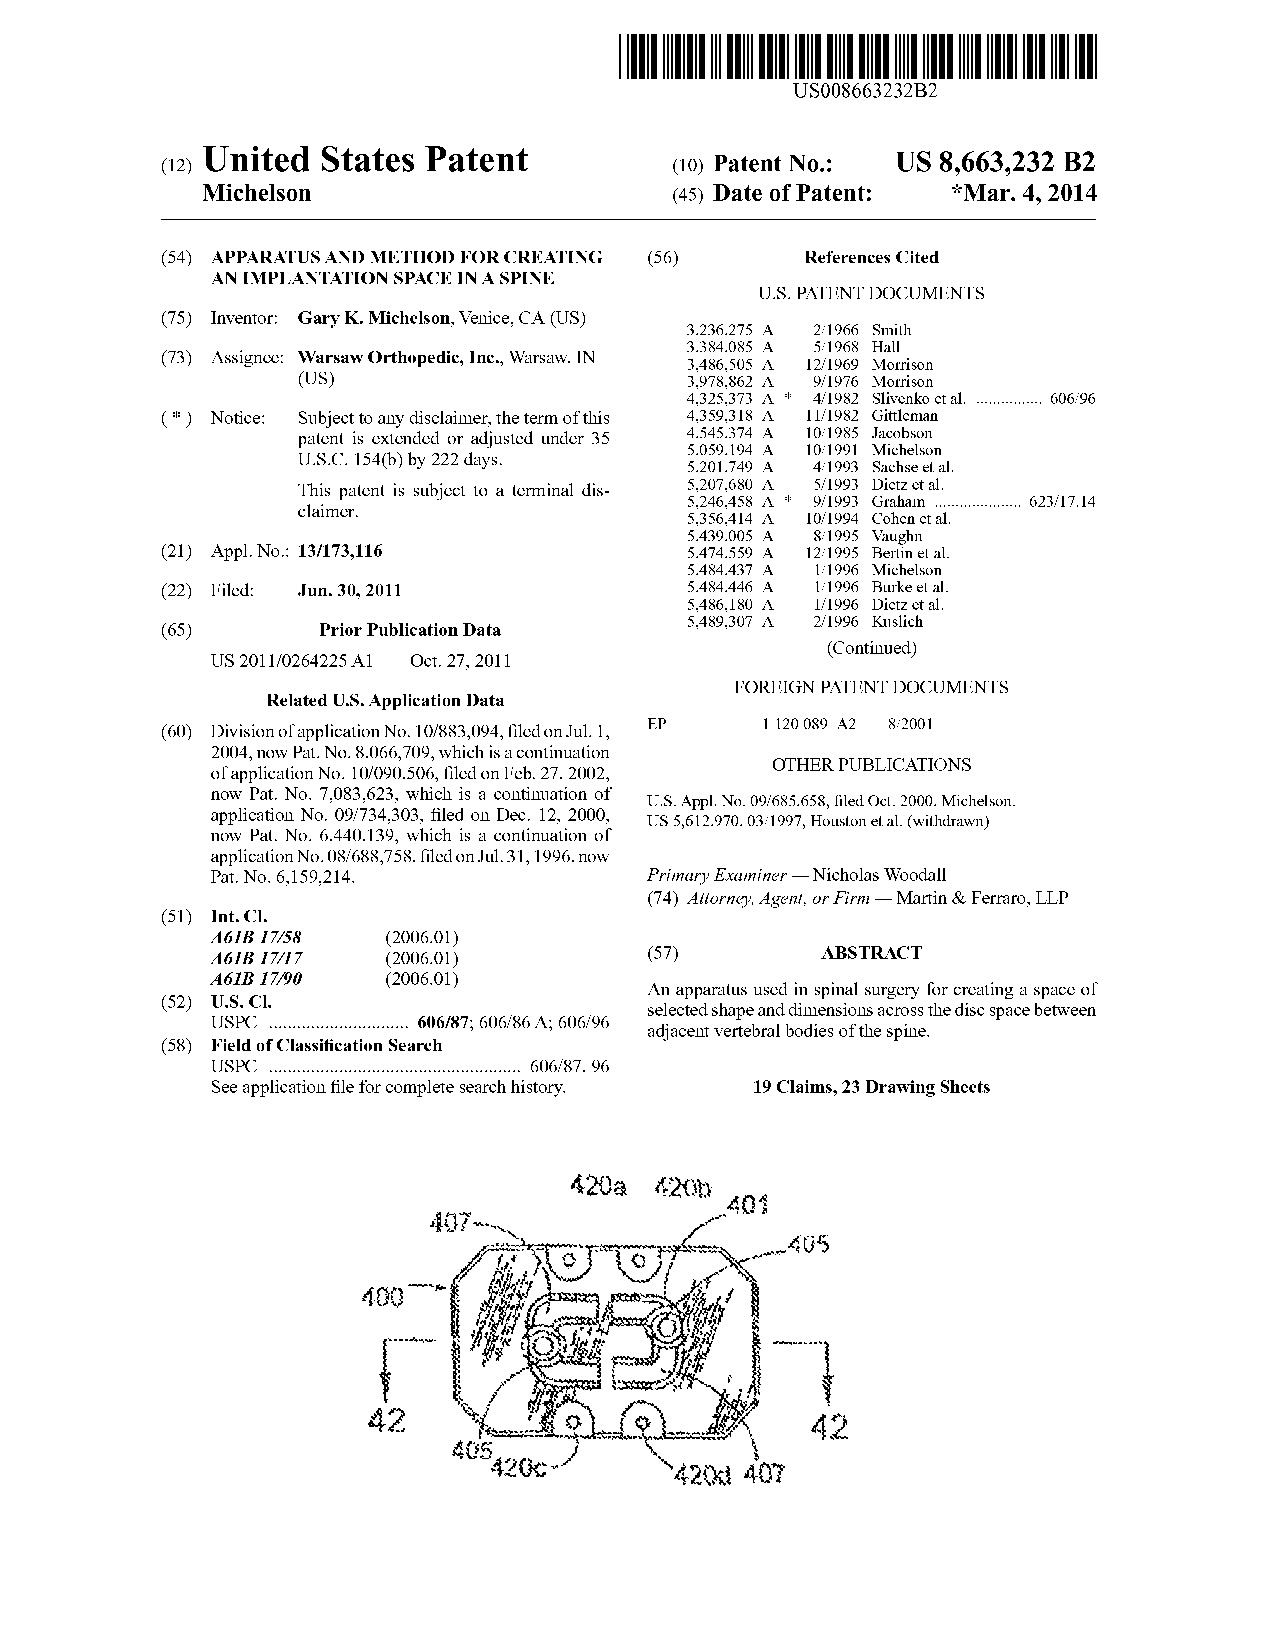 Apparatus and method for creating an implantation space in a spine - Patent 8,663,232